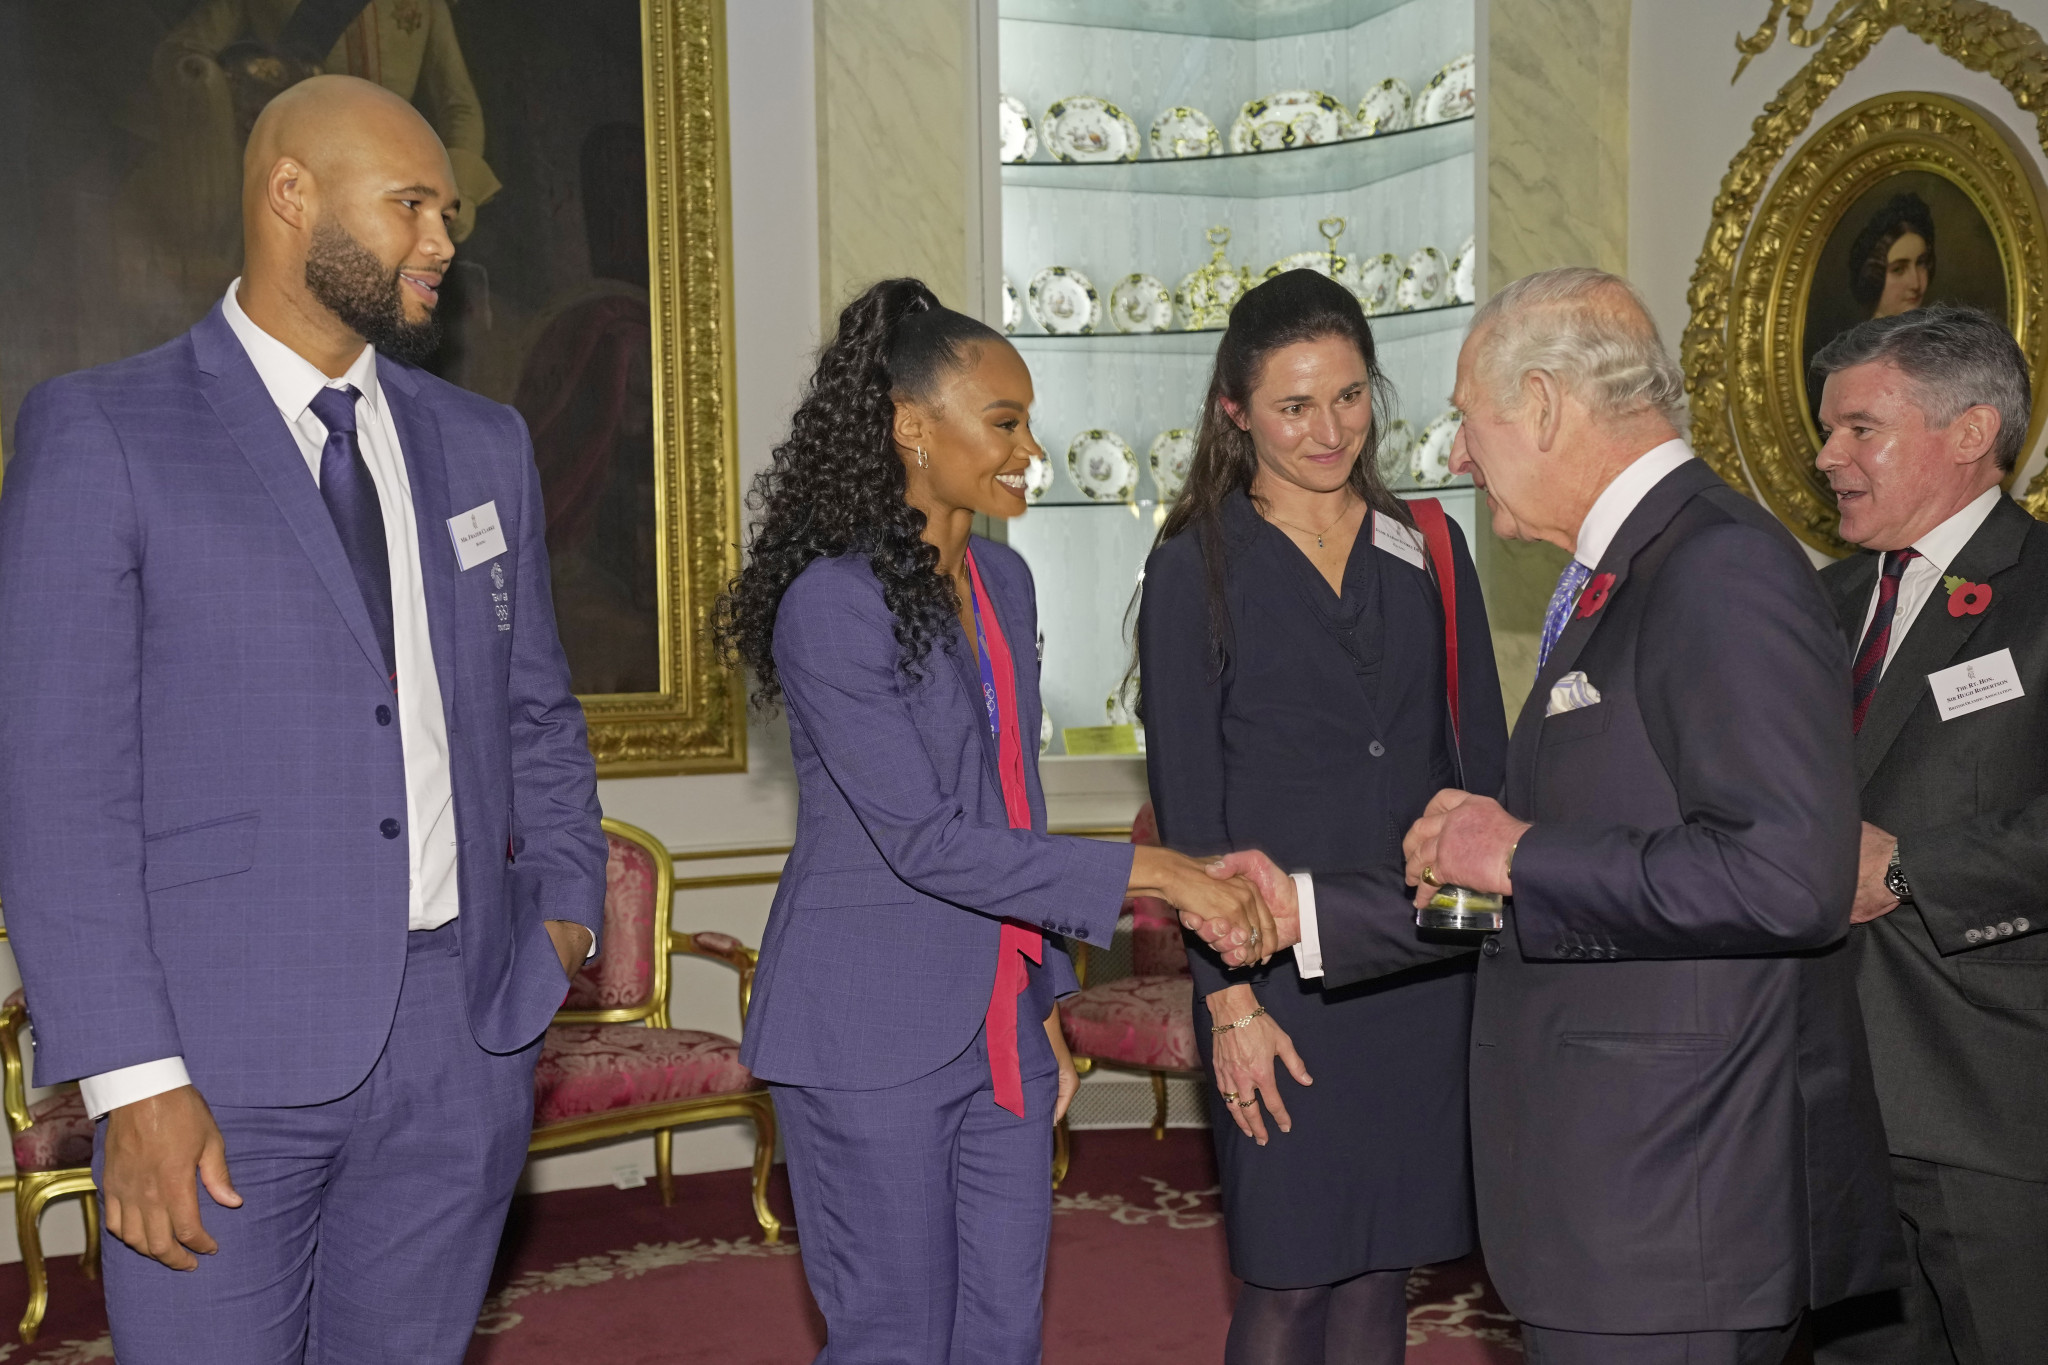 King Charles III hosts reception for British Olympic and Paralympic stars